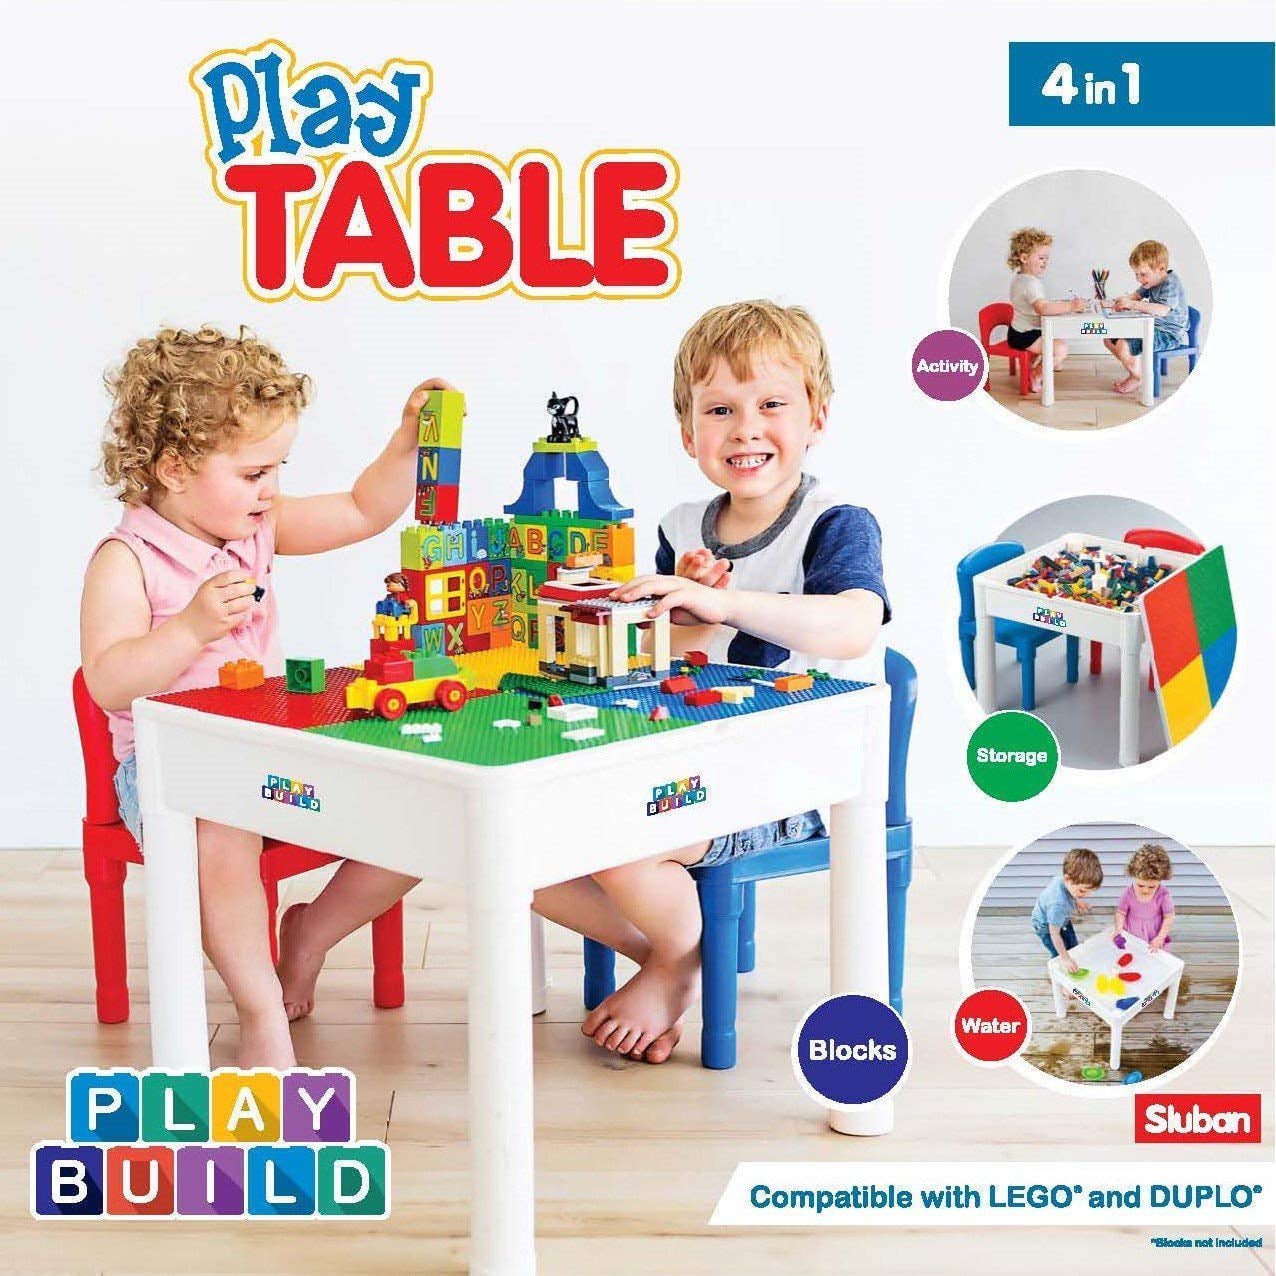 Lego table best item 4 in 1 Play & Build Table Set for Indoor Activity, Outdoor Water Play, Toy Storage & Building Fun Includes 2 Toddler Chairs by Playbuild - Walmart.com